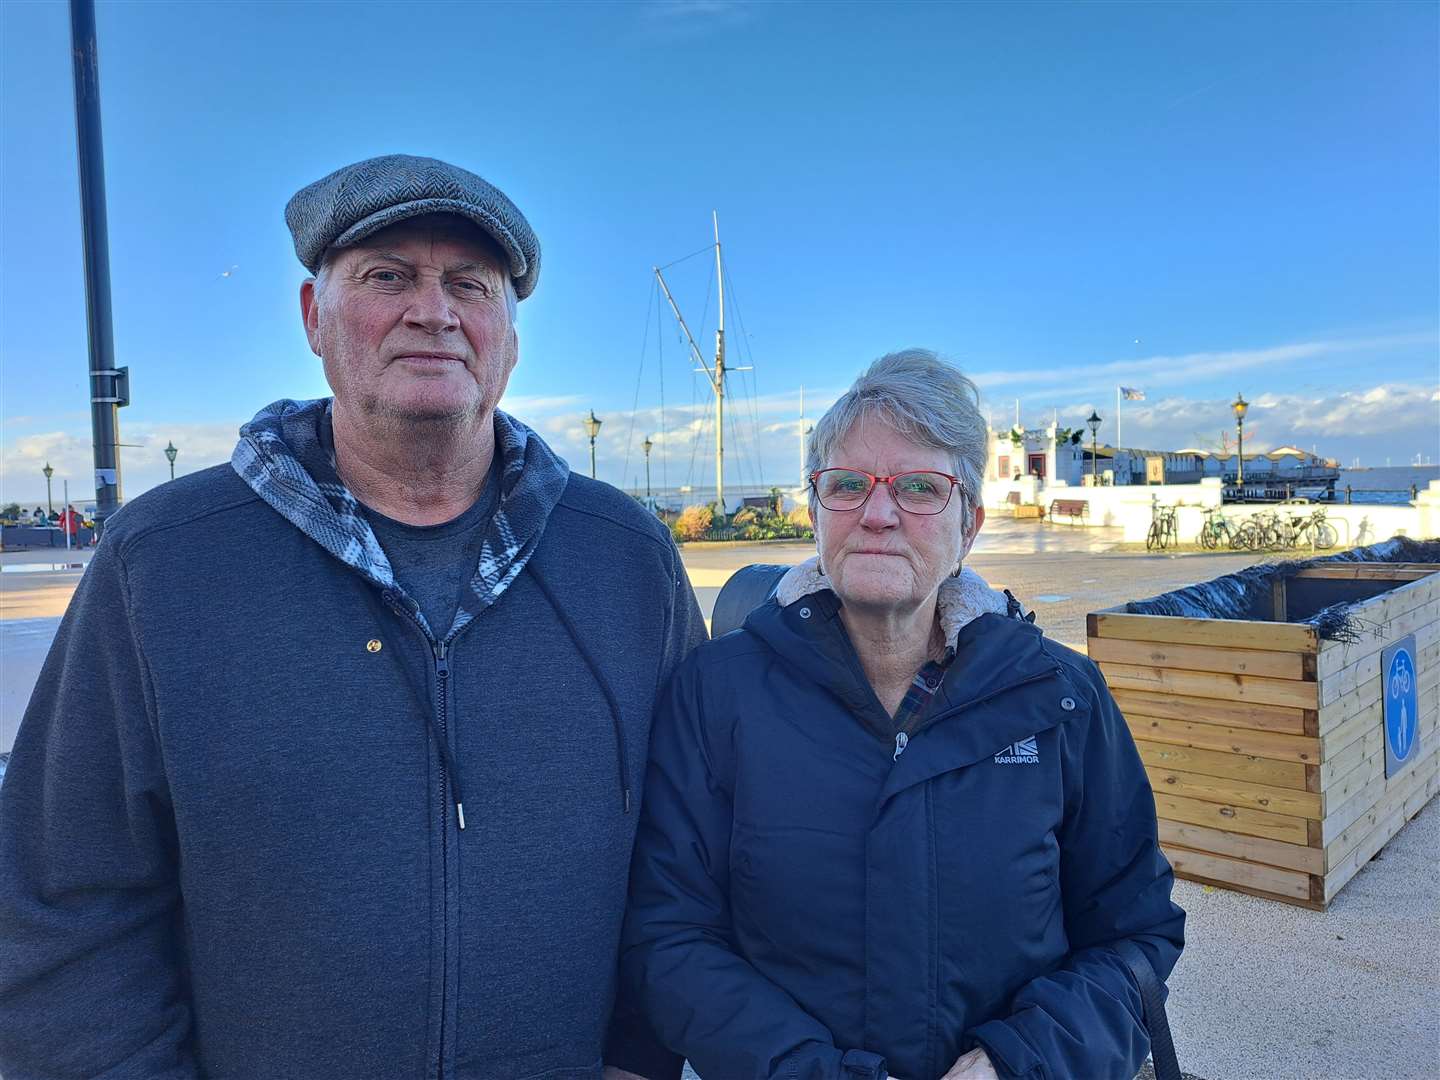 Diane and Les Hardes were visiting Herne Bay seafront from Canterbury for the day and said the KCC-funded project could put some visitors off